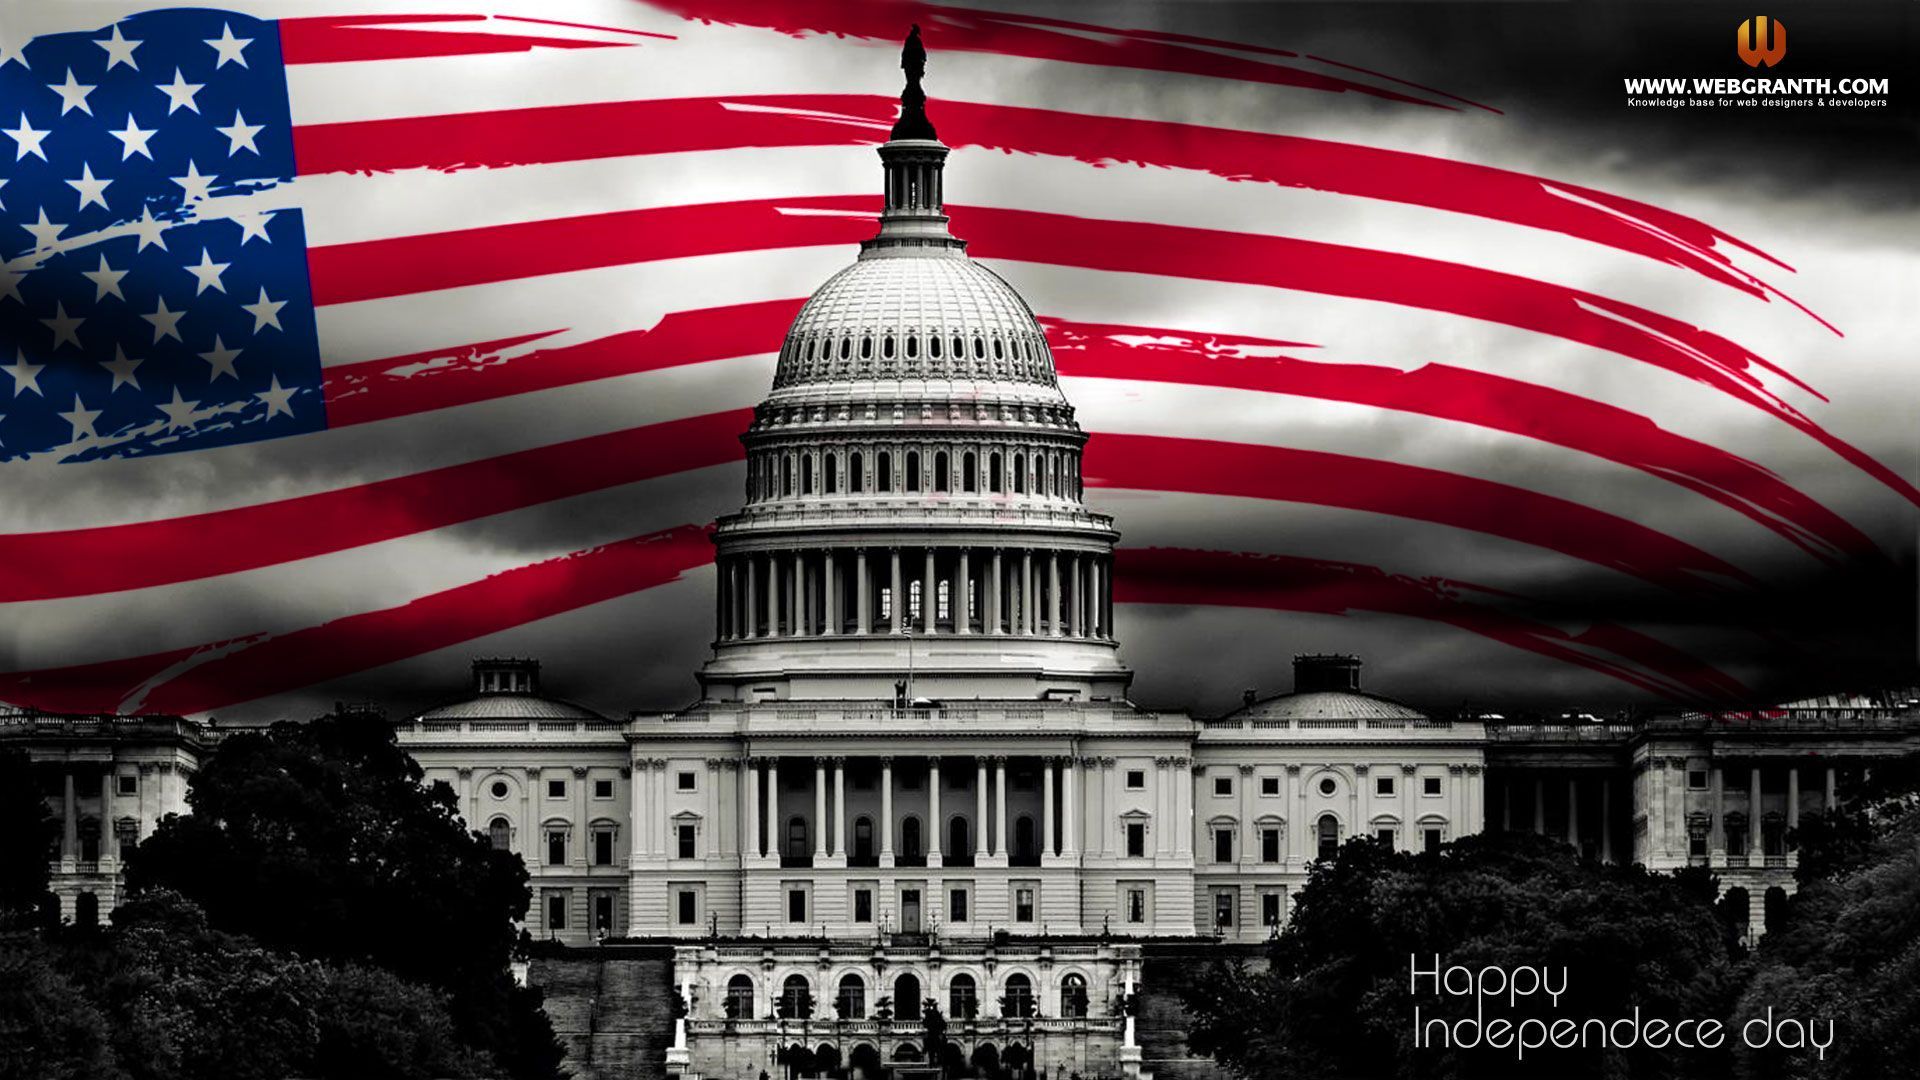 USA Wallpaper wallpaper n. Usa wallpaper, Independence day